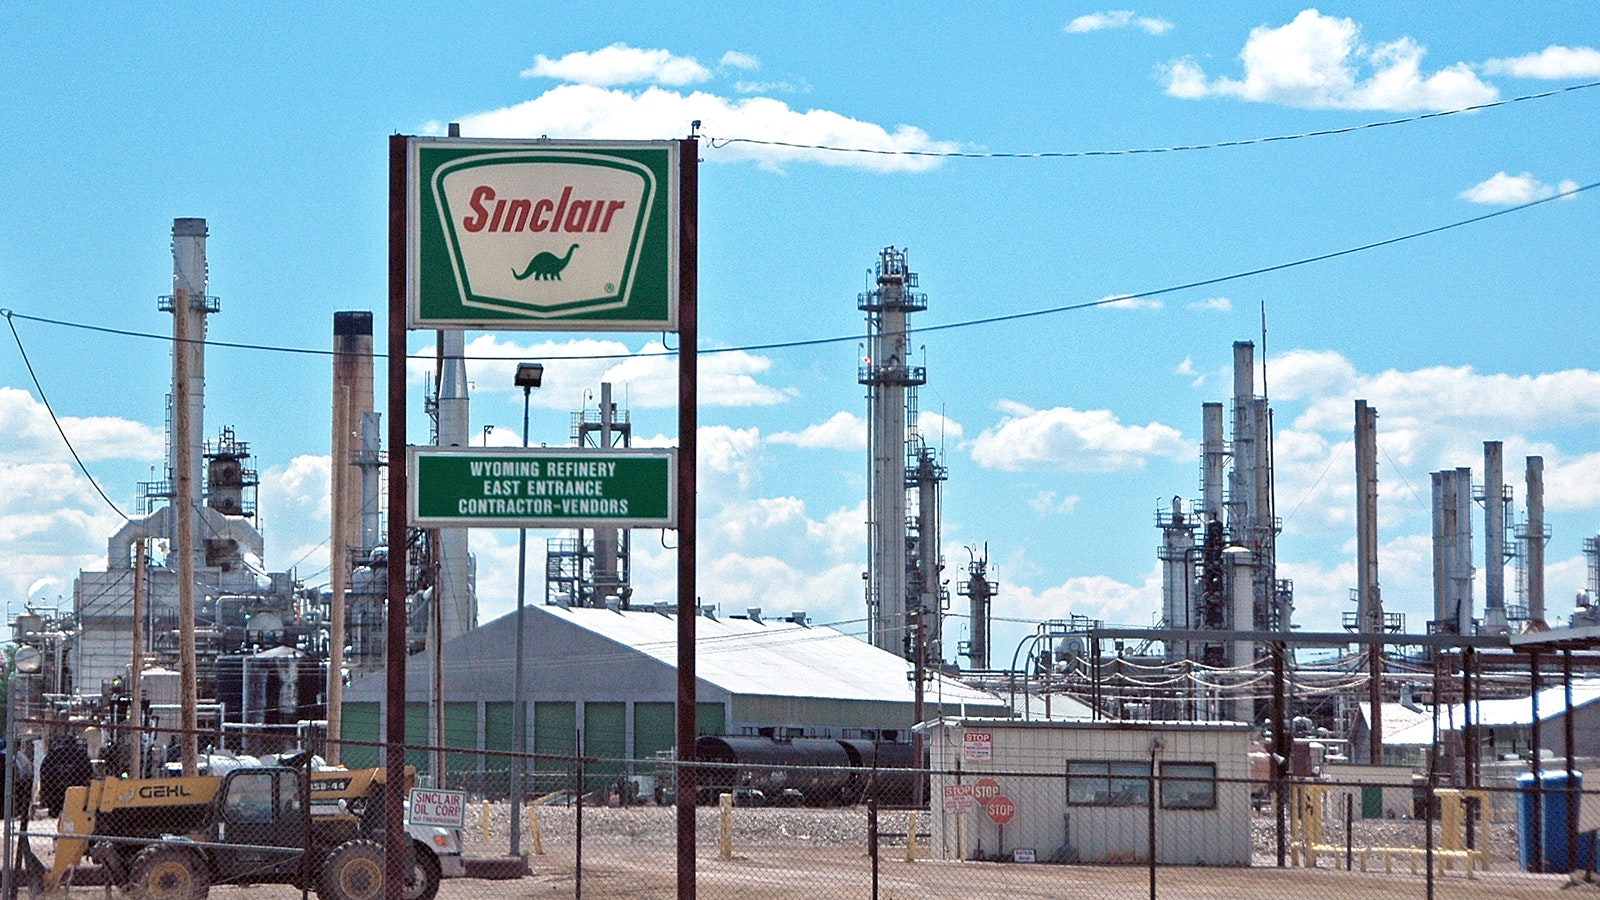 The Sinclair refinery in Sinclair, Wyoming, in this 2011 file photo.